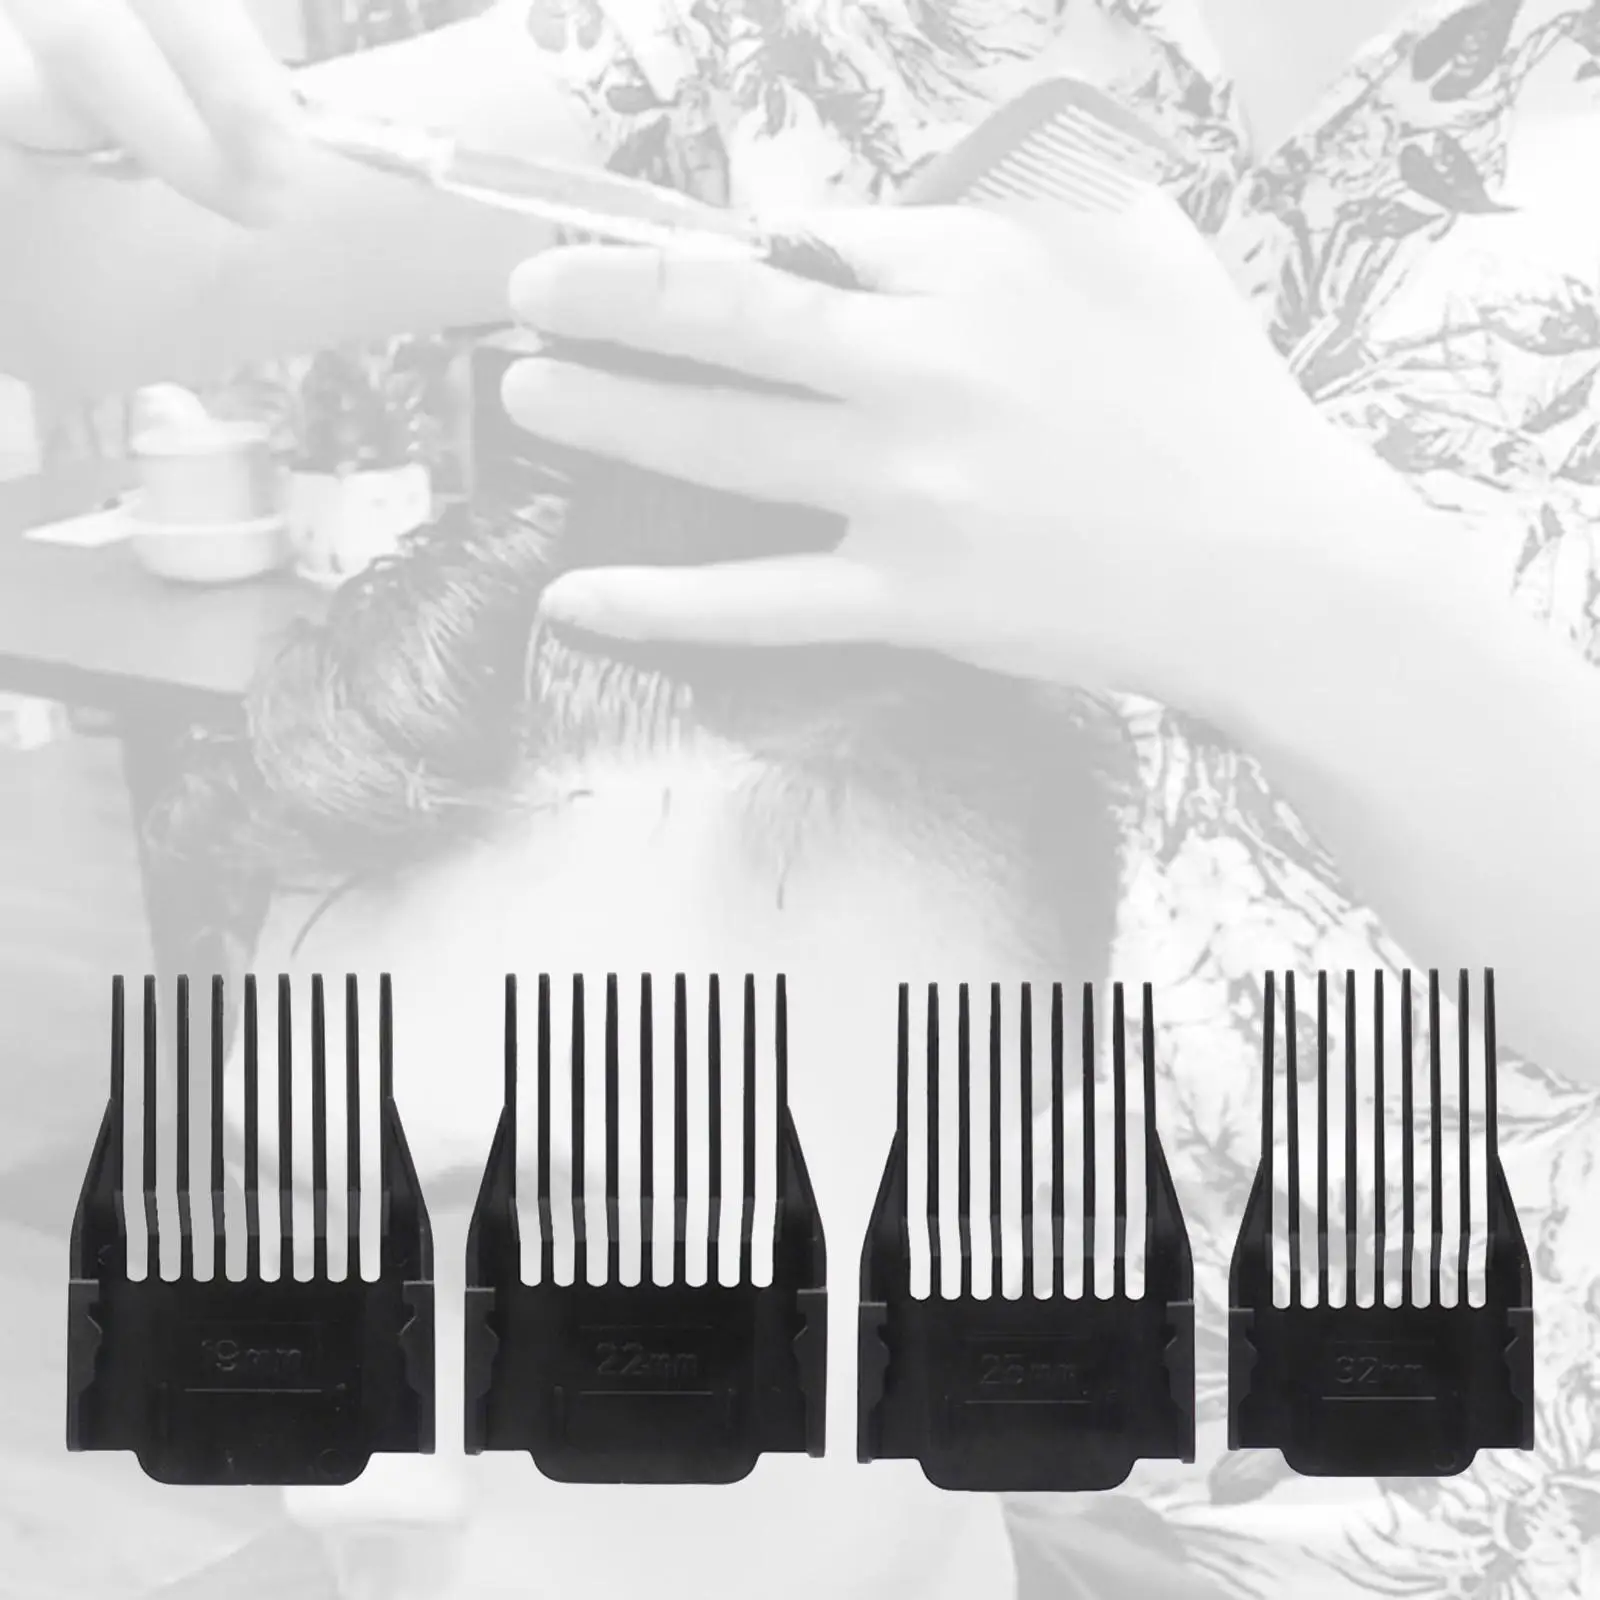 4 Pieces Hair Guide Combs Hair s Cutting Attachment Replacement Hair Limit Comb for Attachment Most Size Hair s/